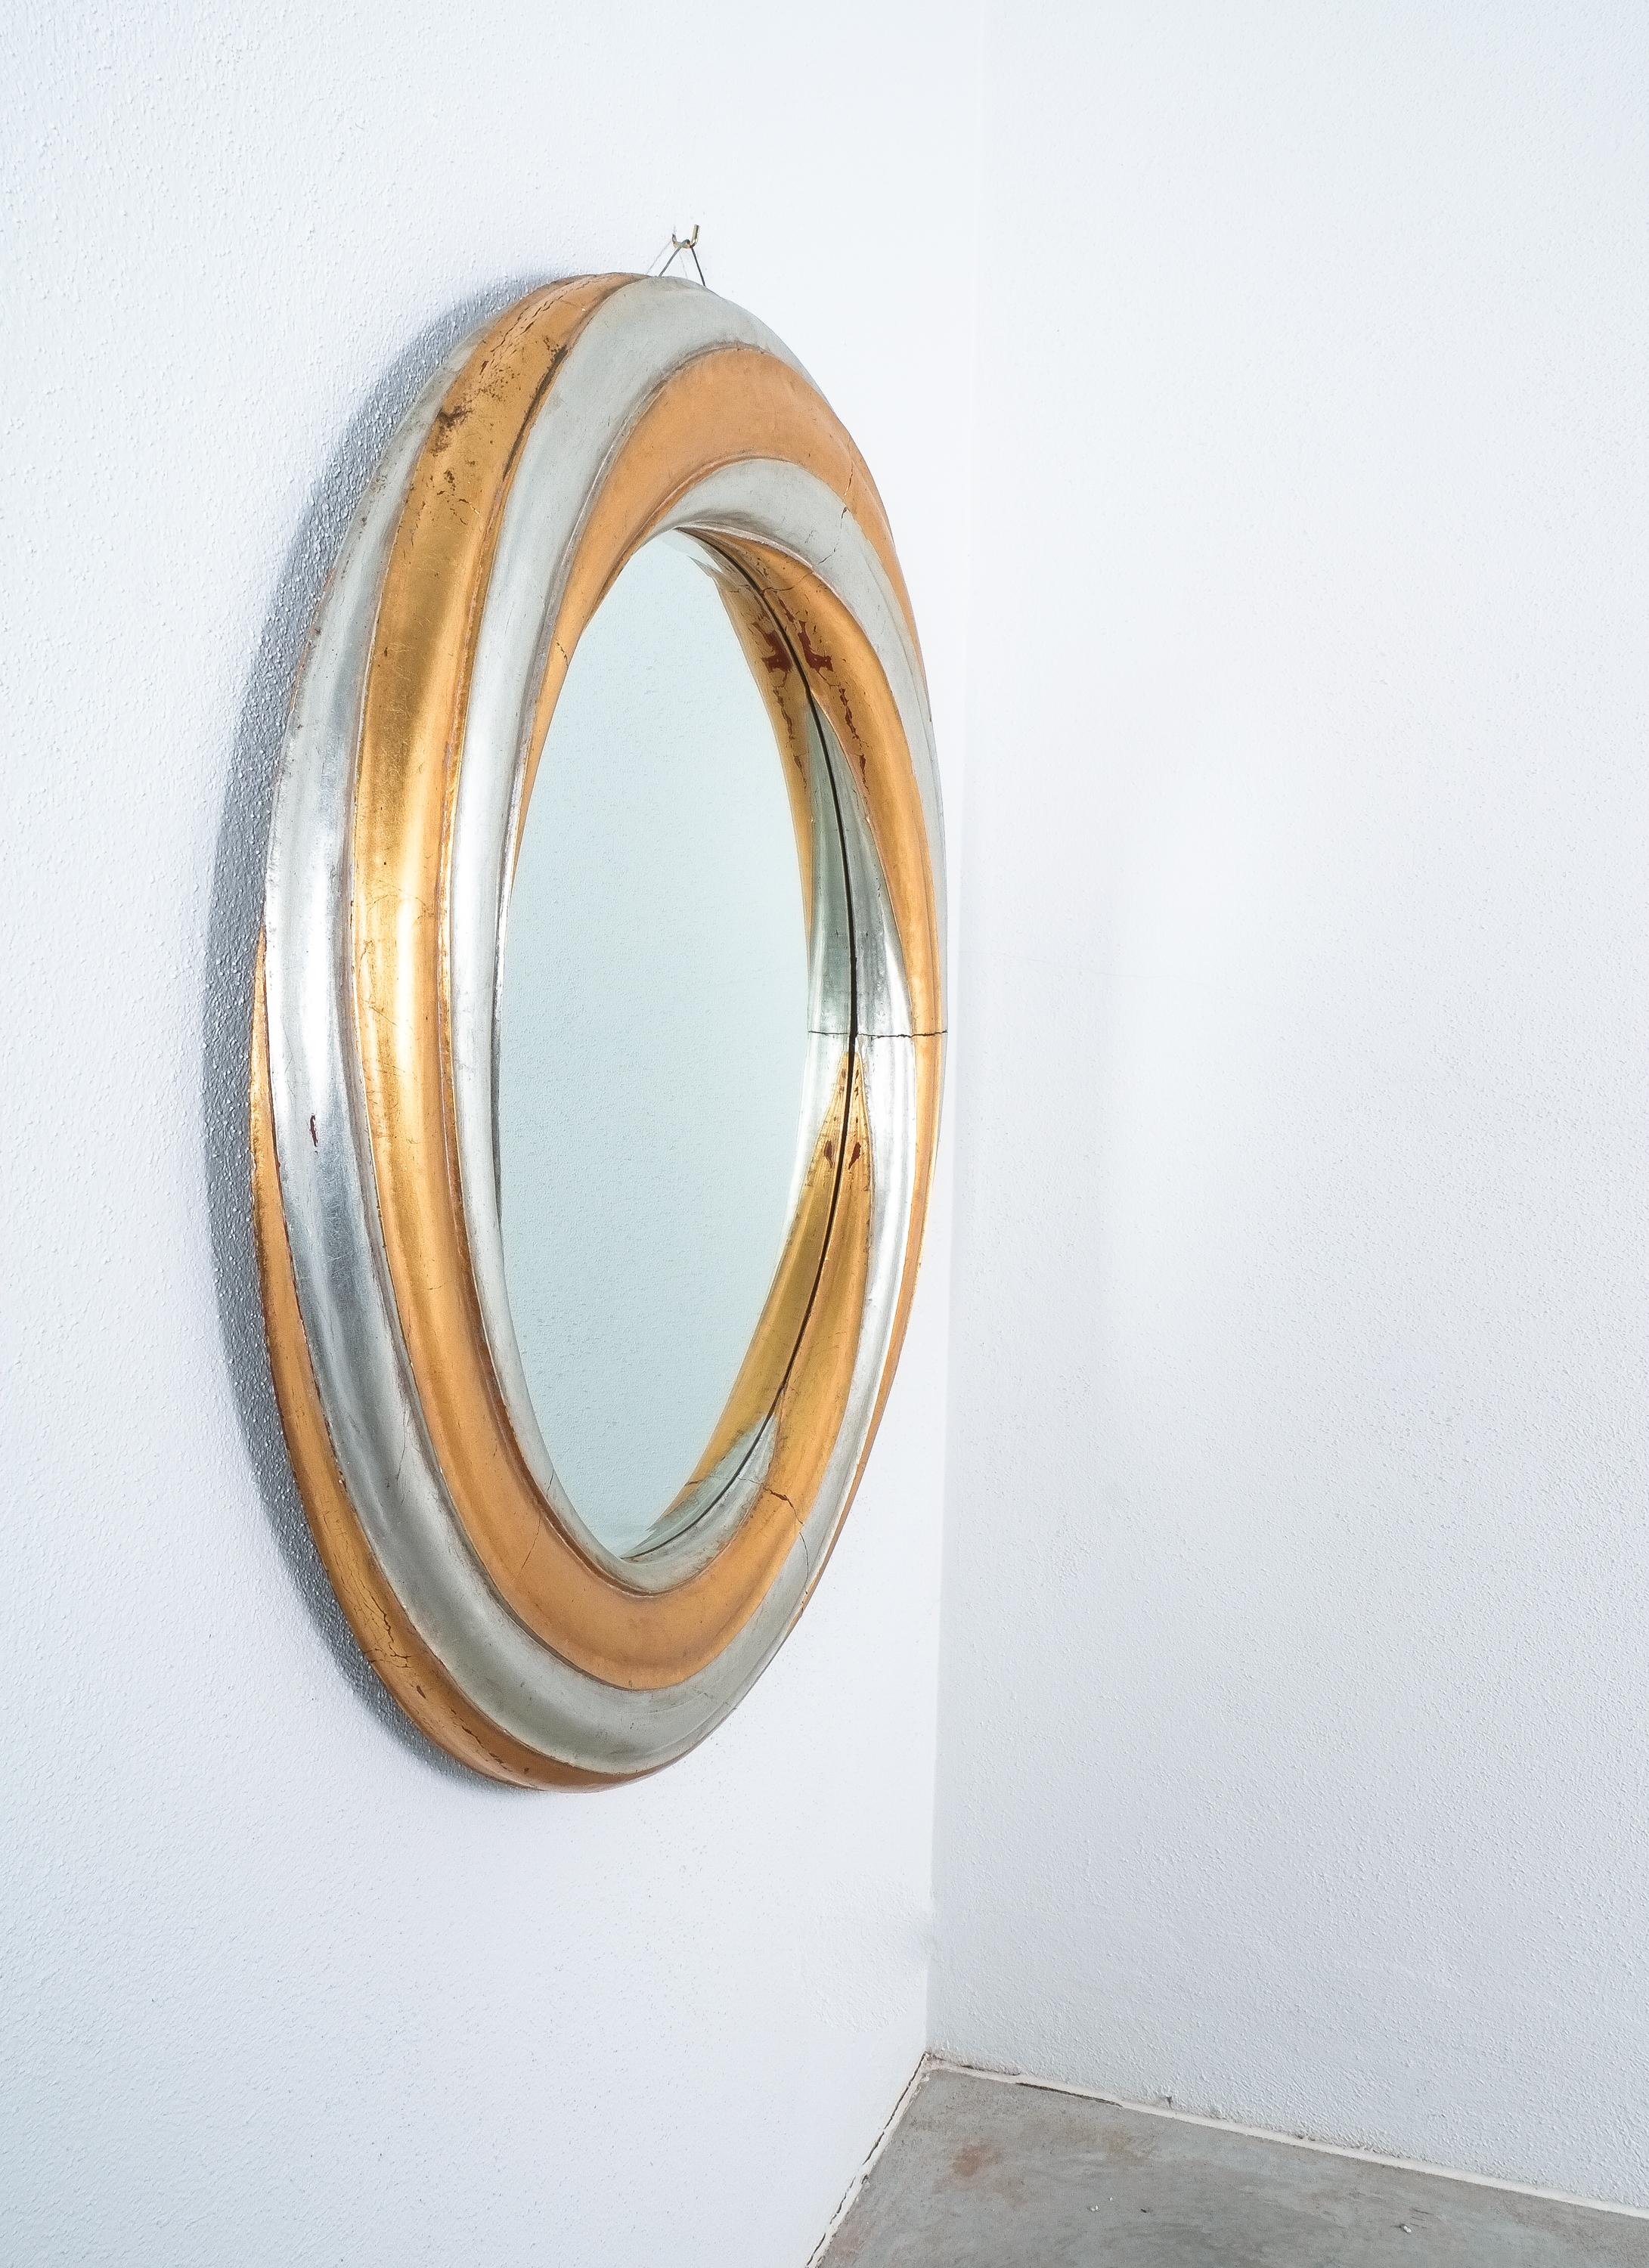 Large Wood Swirl Trompe l’oeil Wall Mirror, Italy For Sale 2